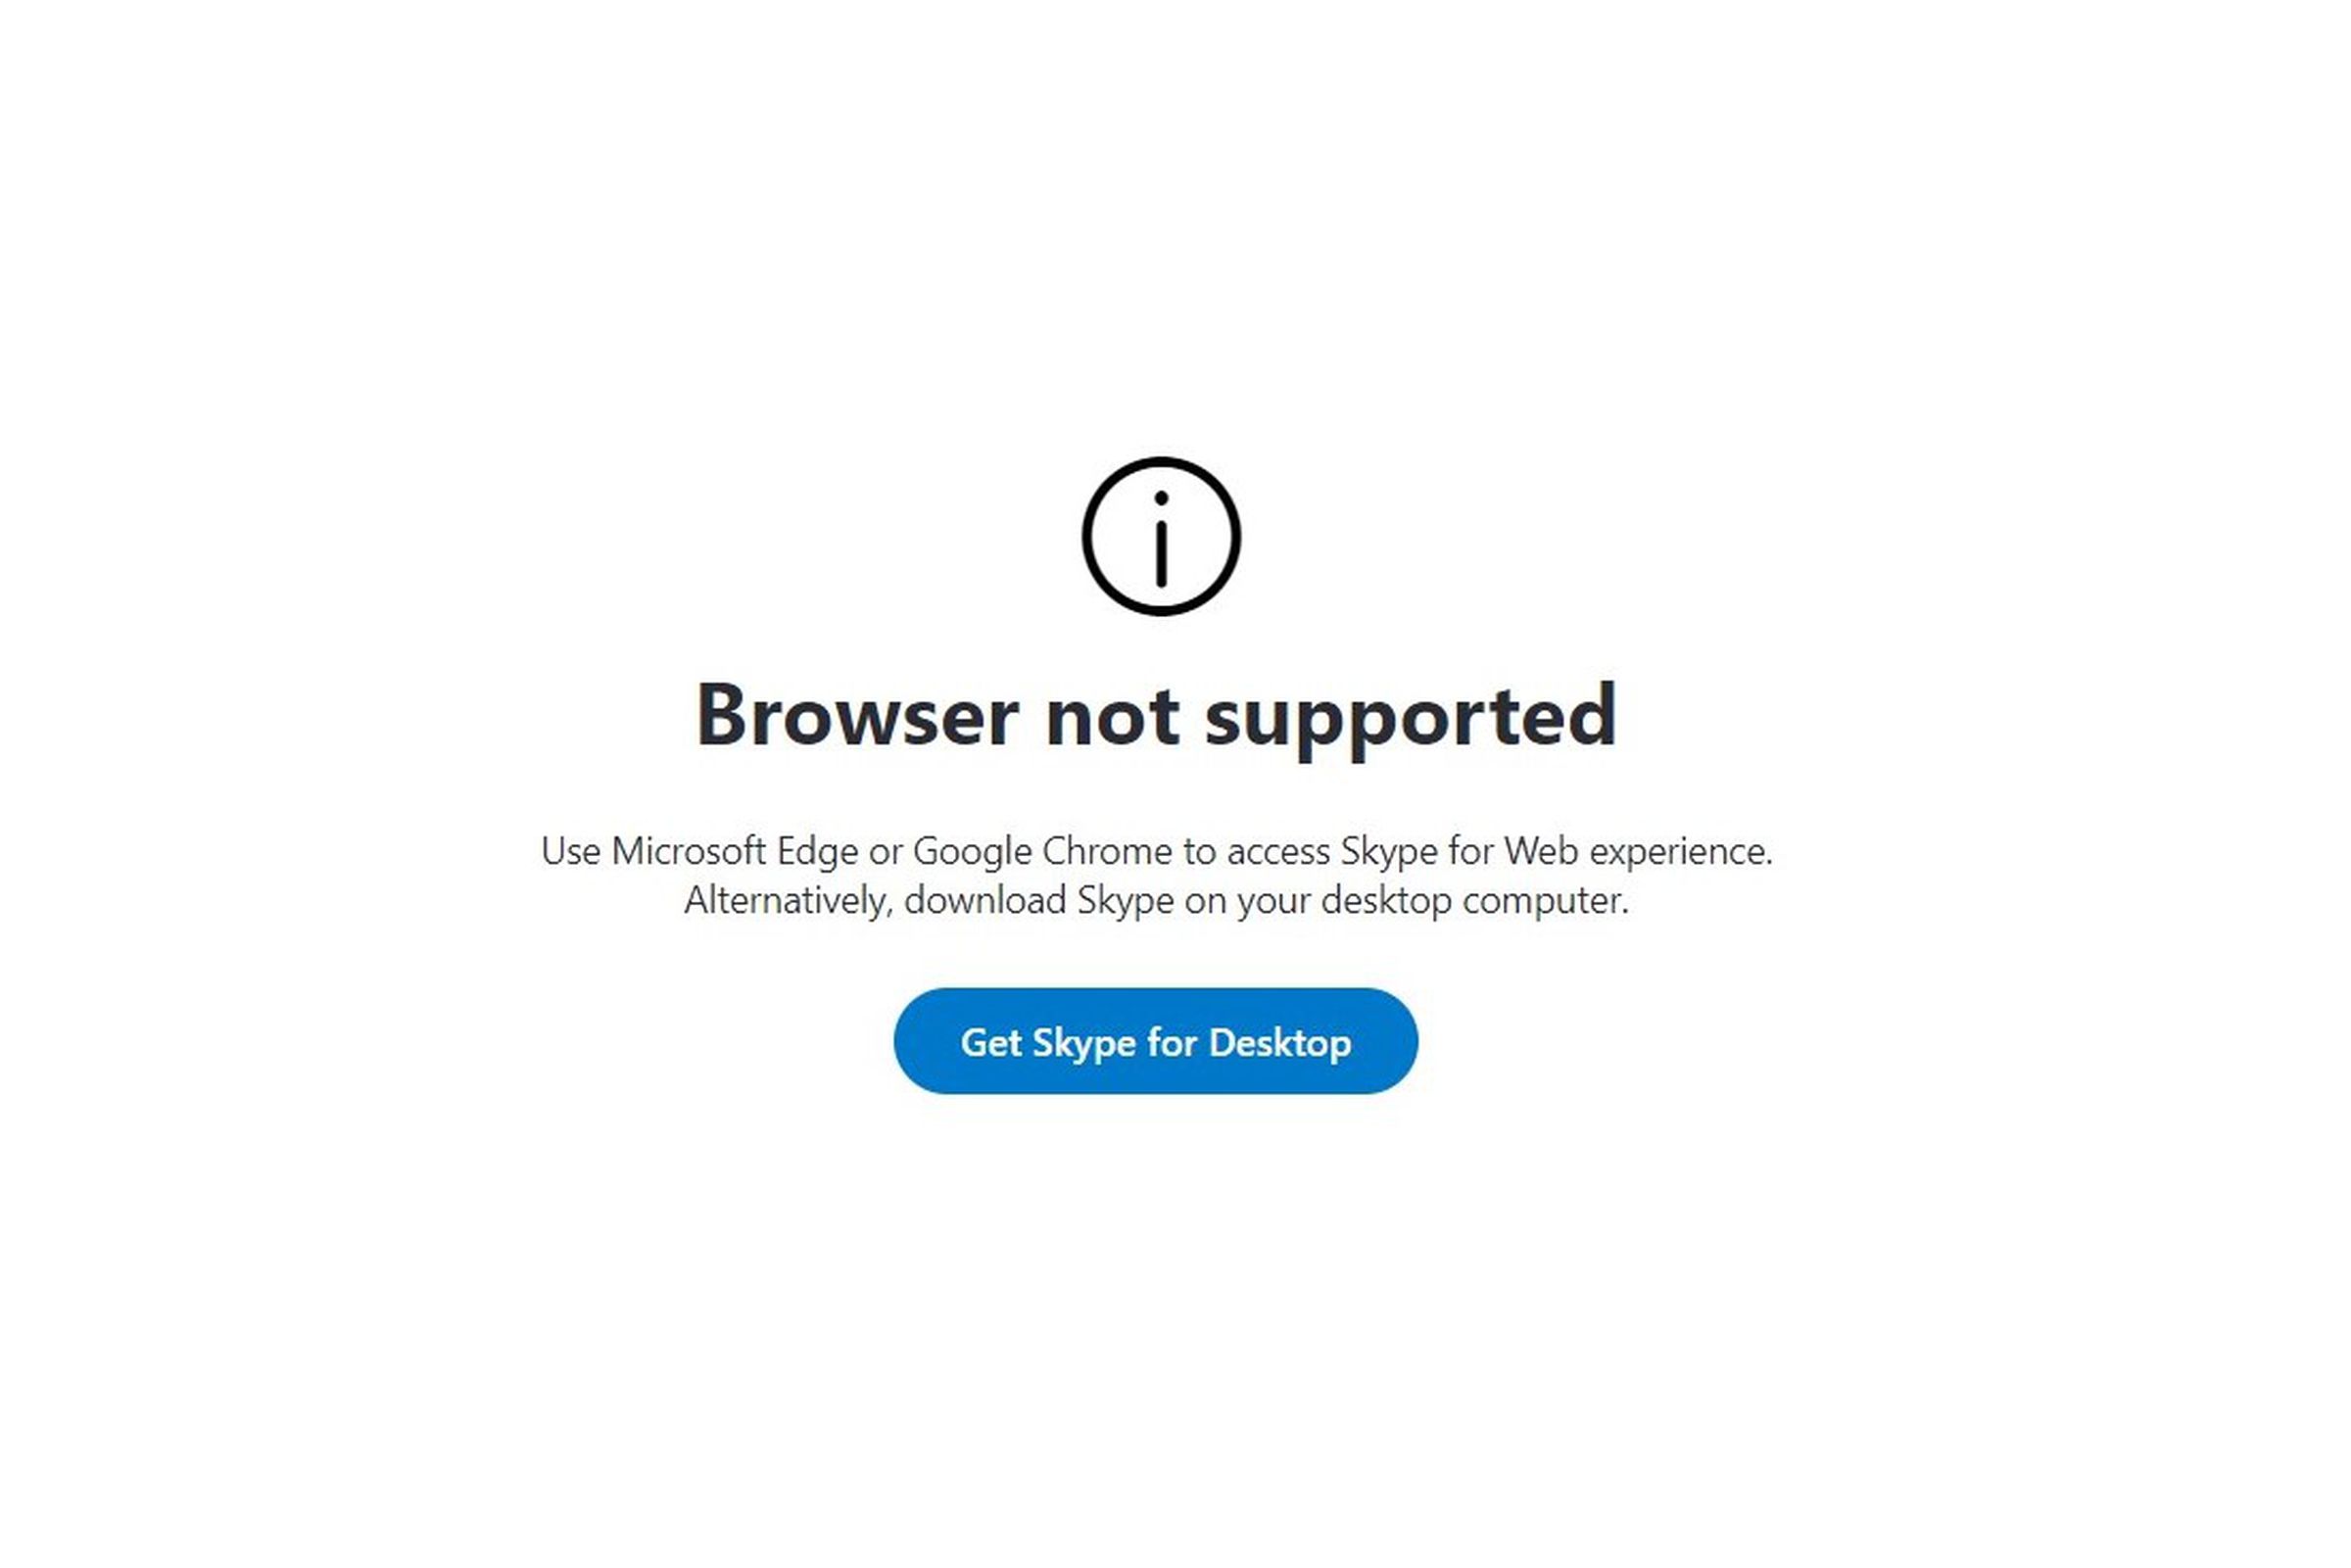 Attempting to access Skype for Web with another browser generates an error message, such as the one shown here. 